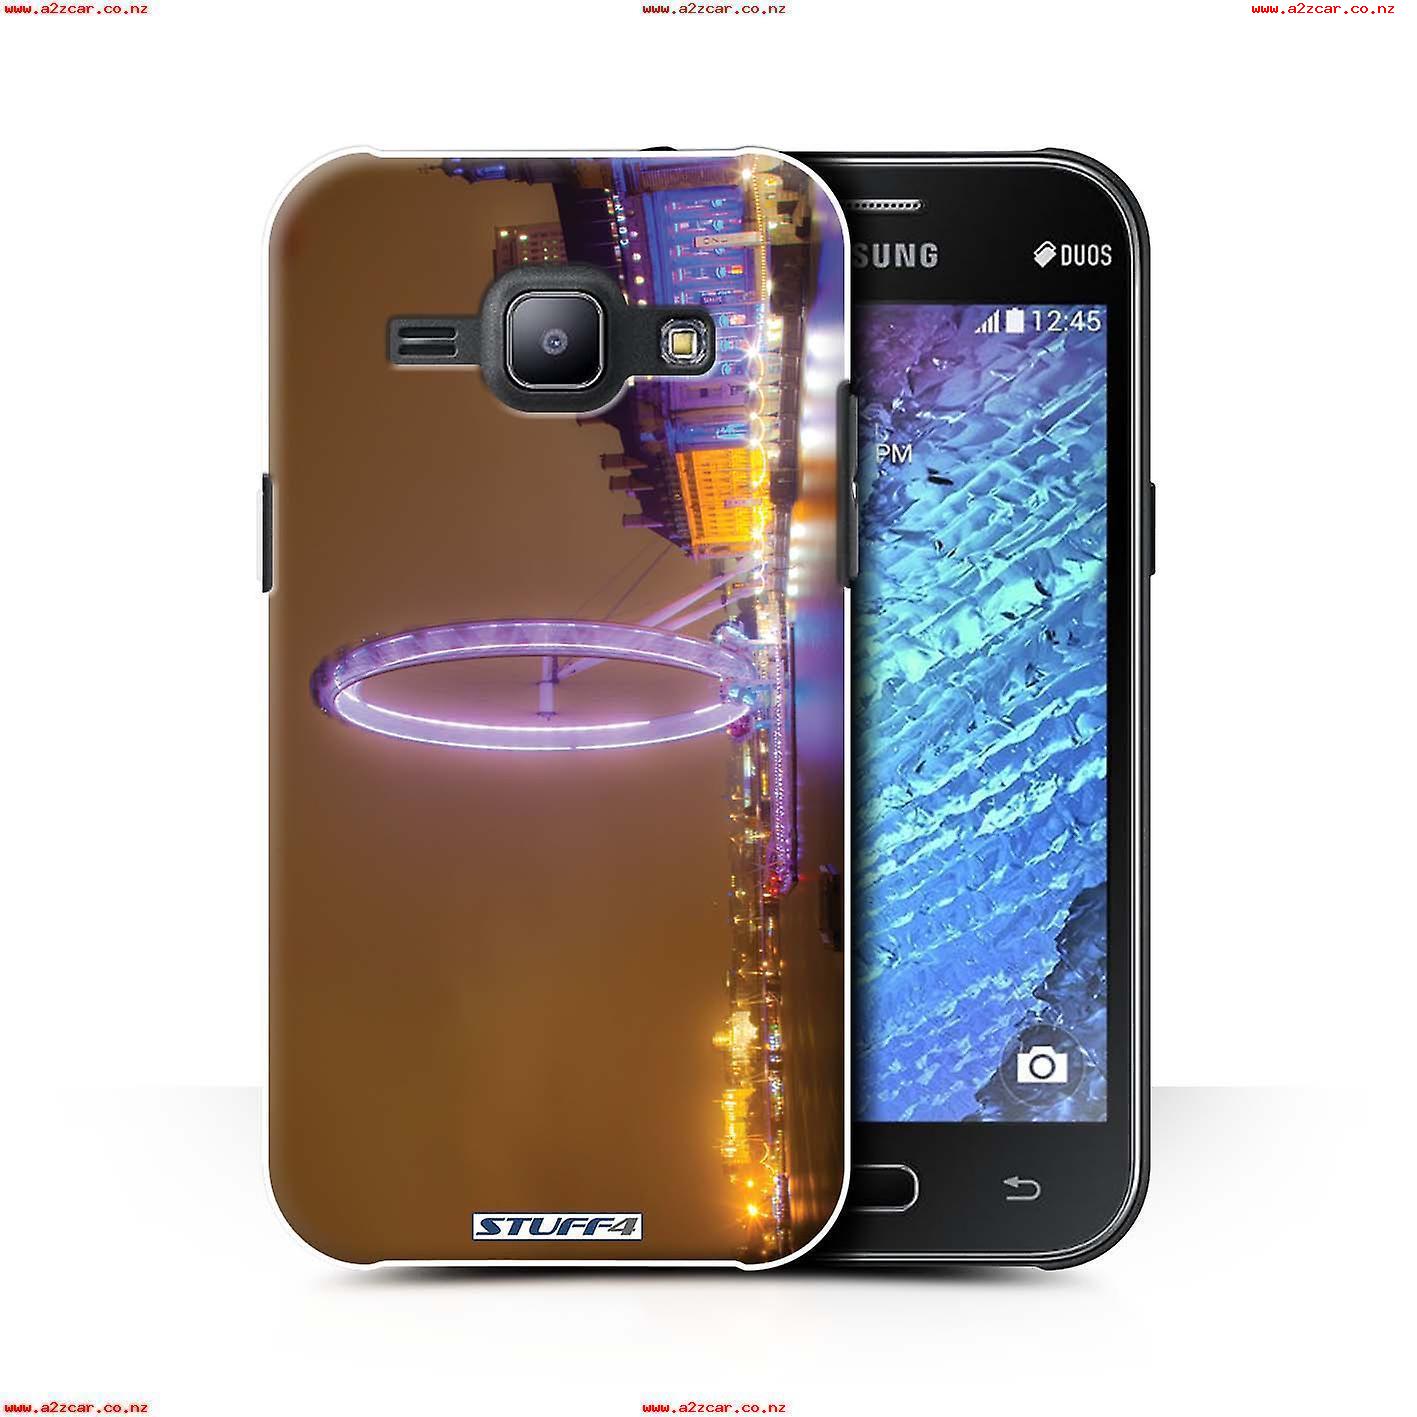 Stuff4 Case/cover For Samsung Galaxy J1 Ace/j110/london - Samsung 4g Price 2018 Model , HD Wallpaper & Backgrounds